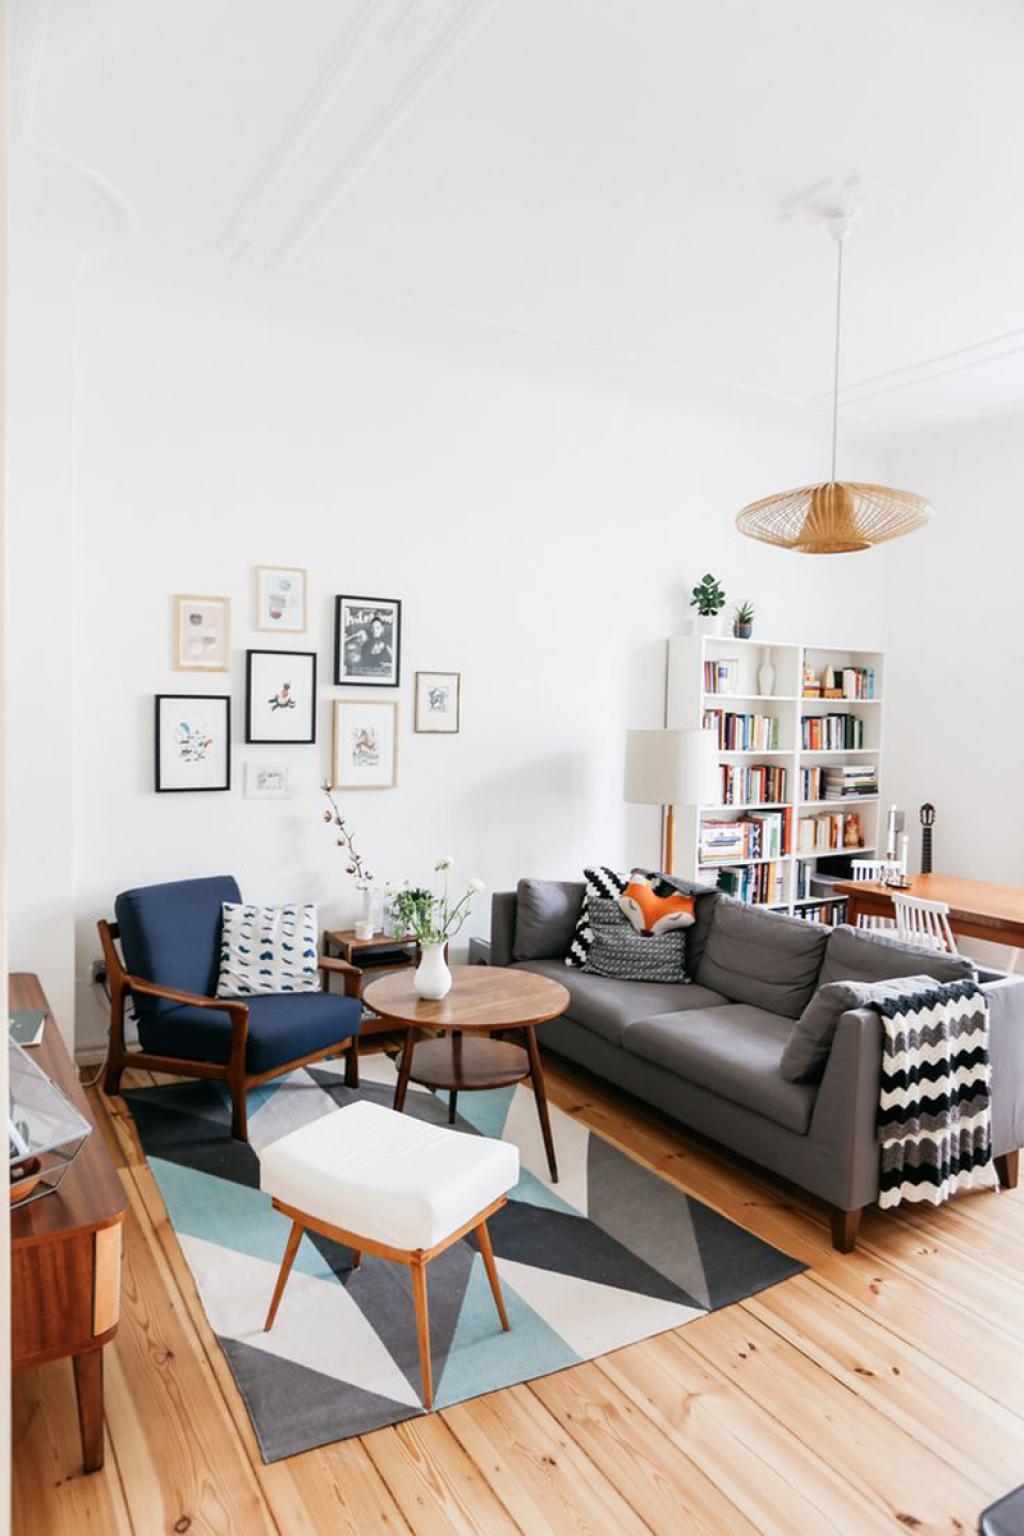 Get Inspired By These Stunning Scandinavian Living Room Ideas